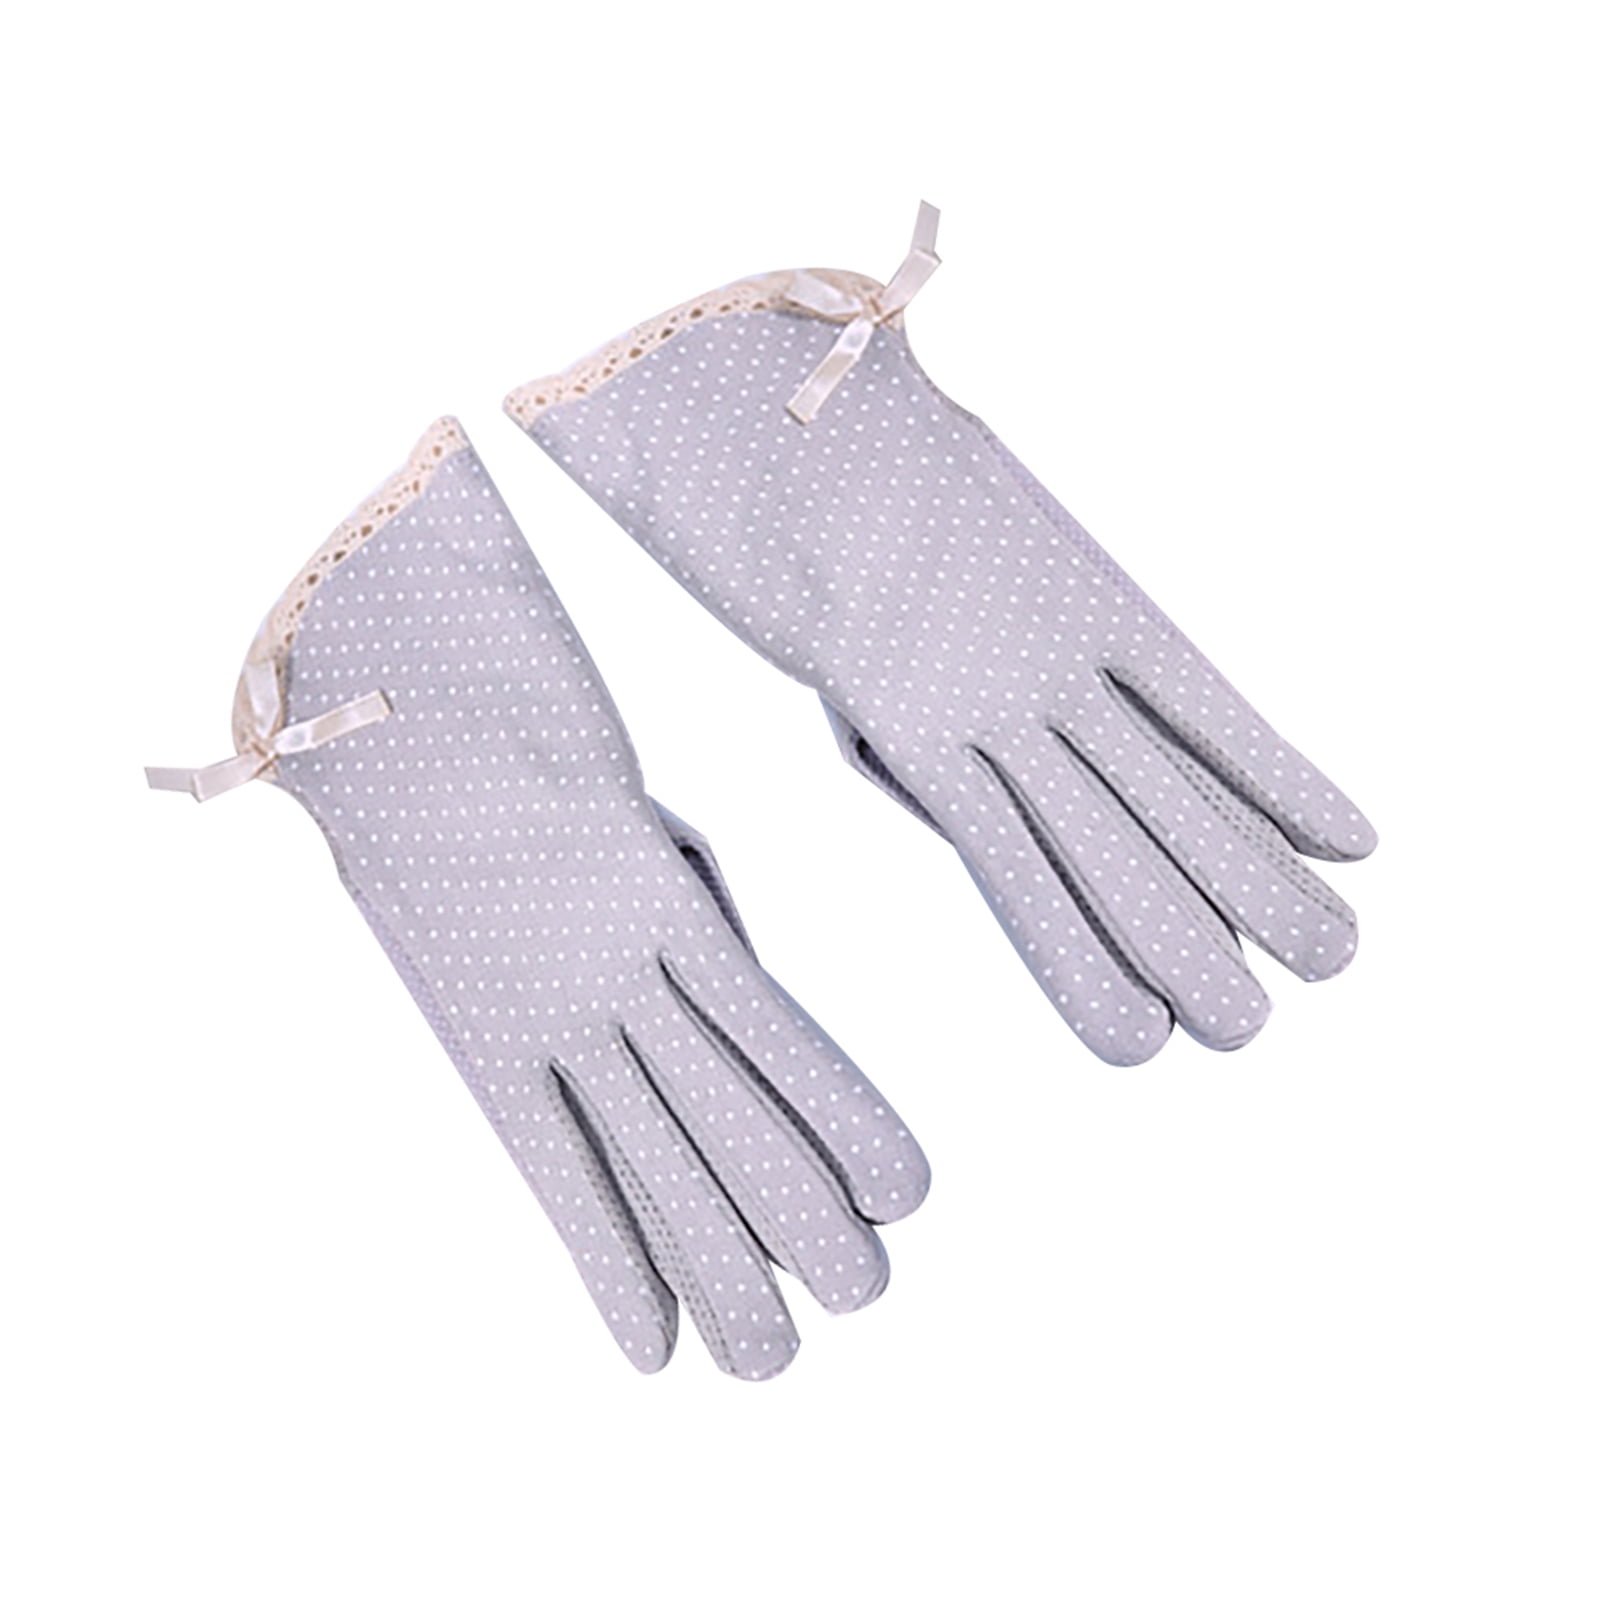 Women Floral Lace Gloves Wedding Party Prom Summer Driving Touch Screen Gloves 